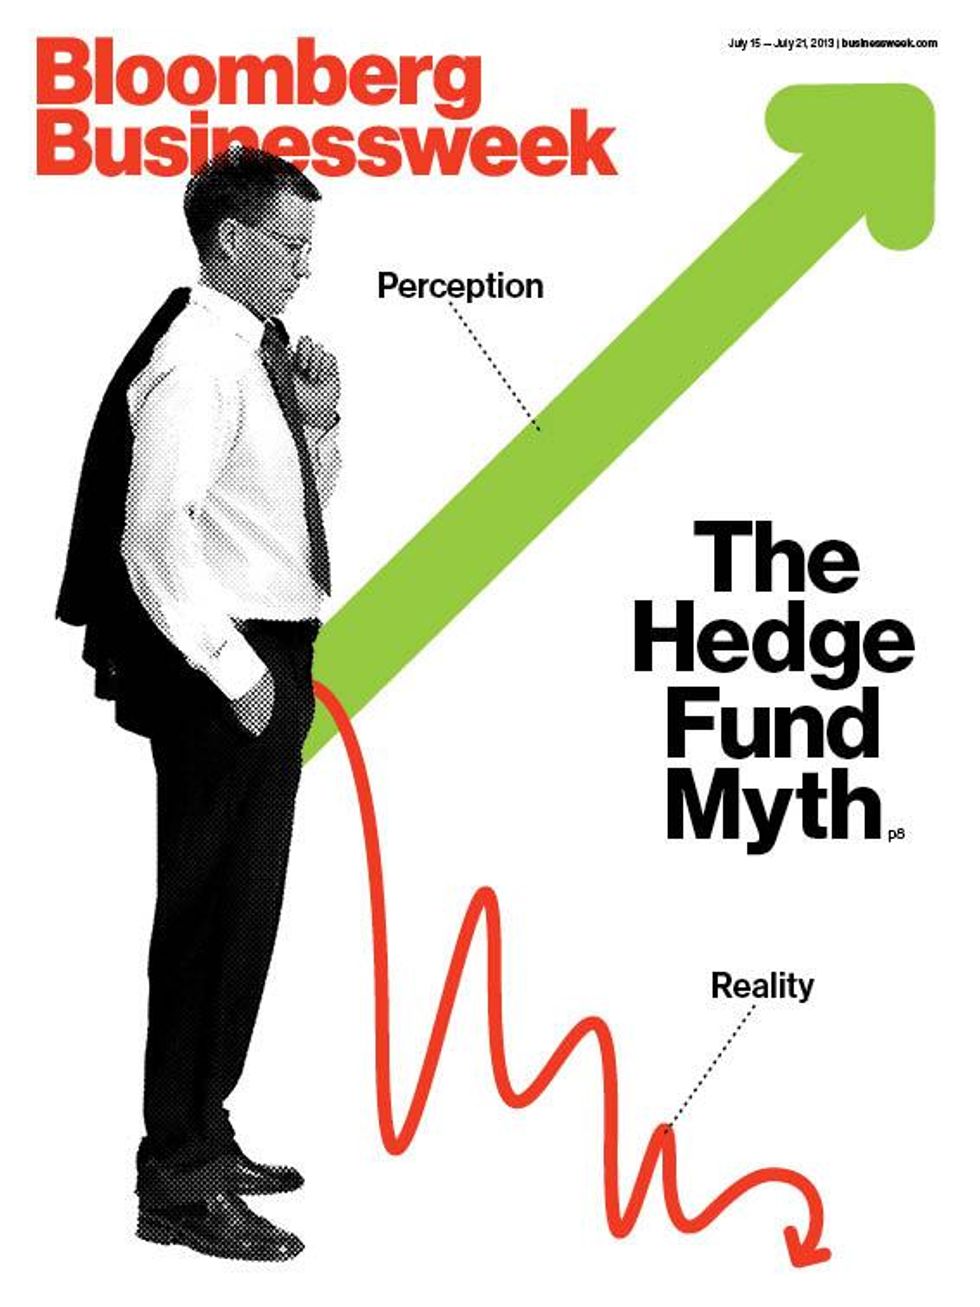 Business Week Cover Subtly Hints Hedge Funds Have Lost Their Erections Like, You Know, A Floppy Flaccid Penis